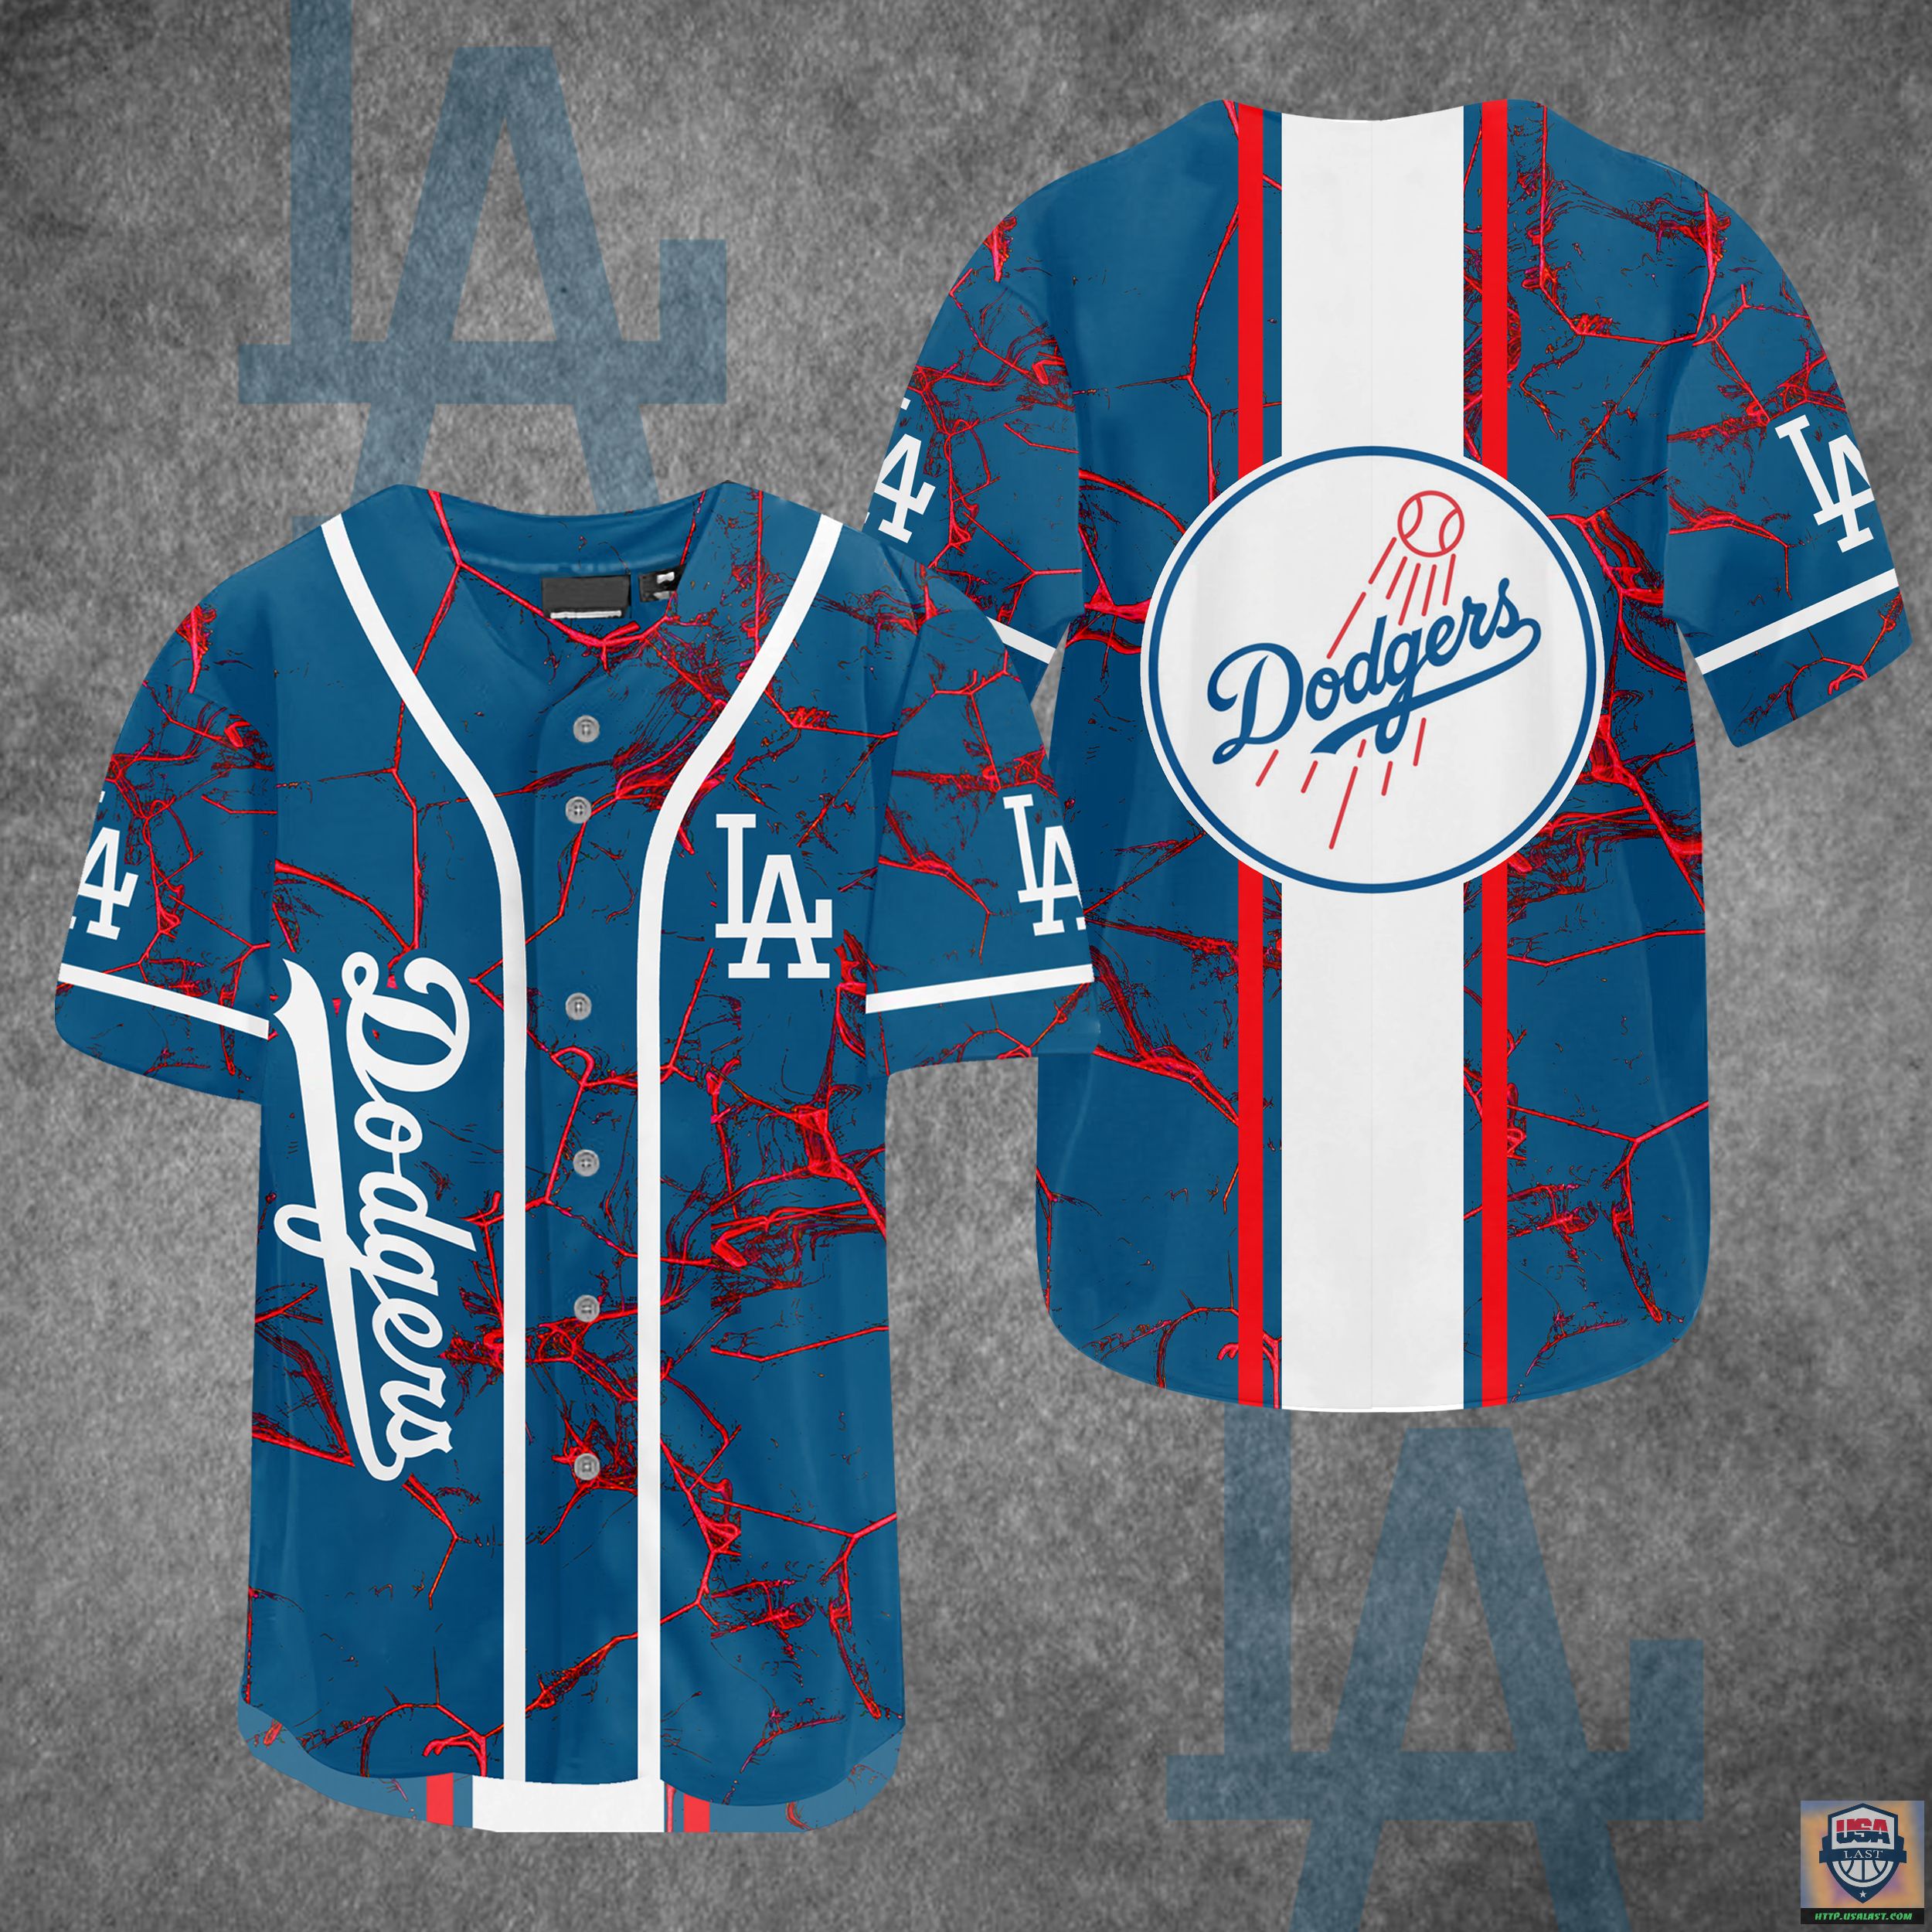 Los Angeles Dodgers Authentic Baseball Jersey Shirt – Usalast